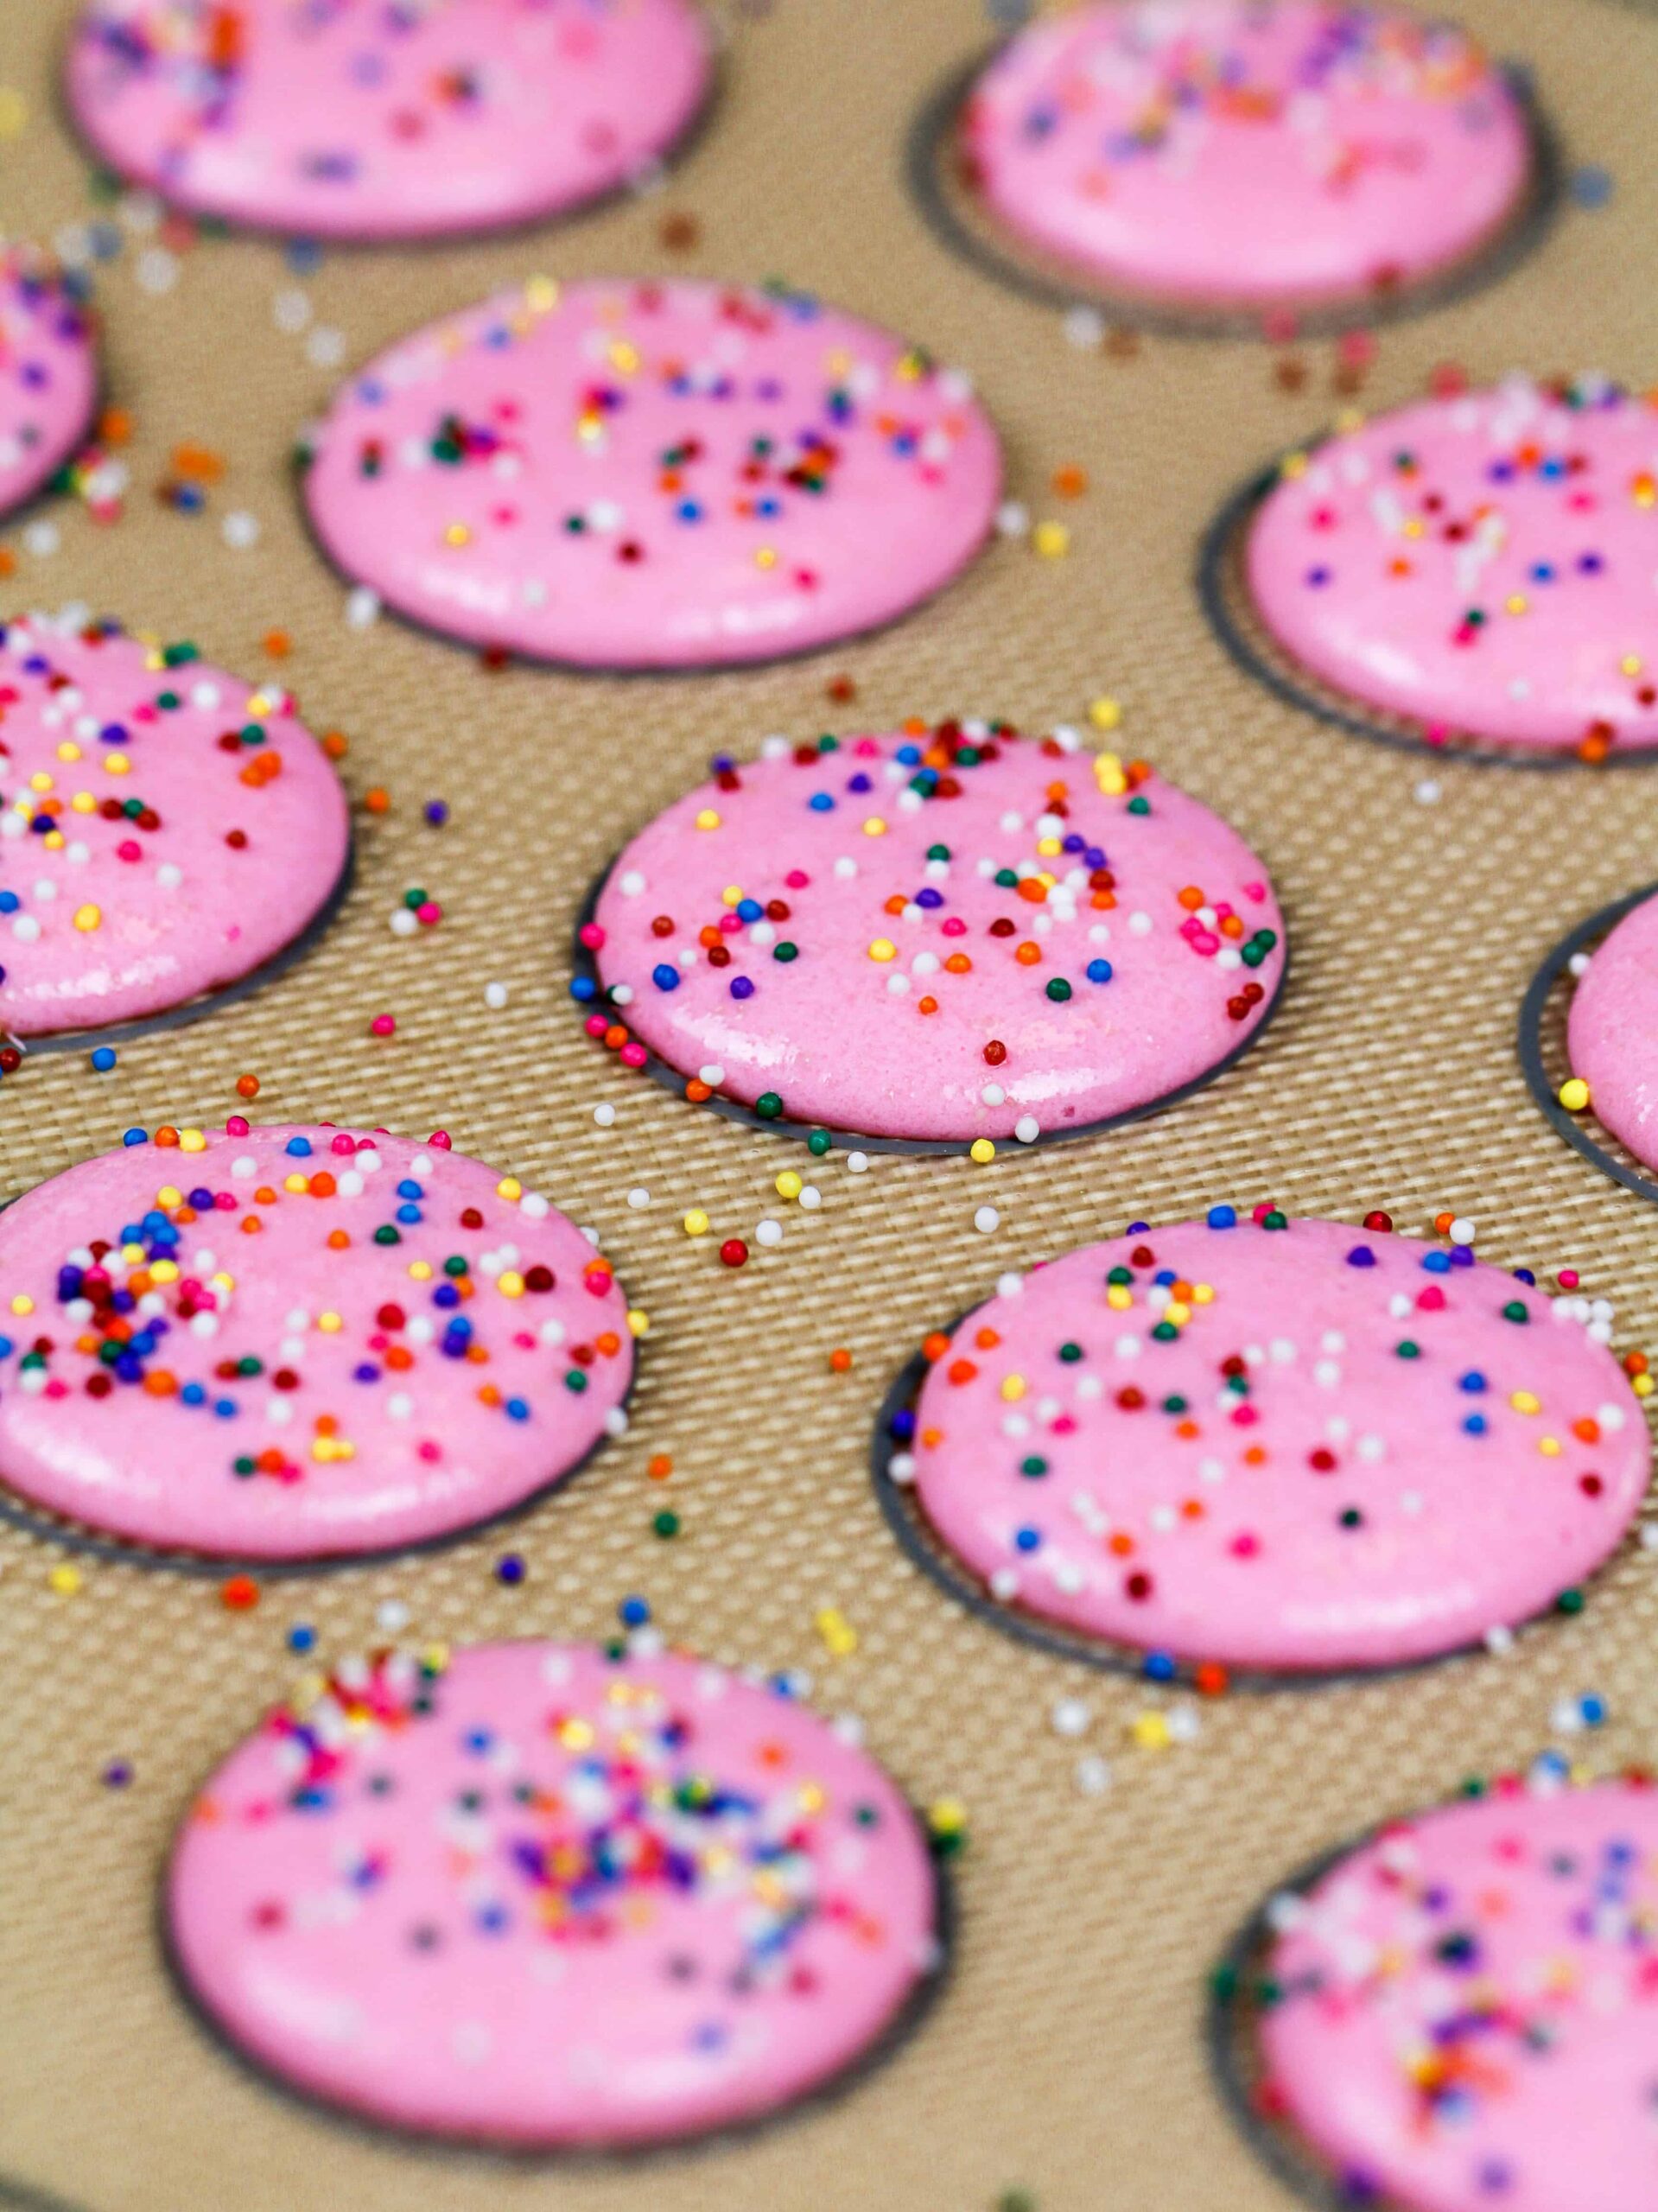 image of birthday cake macaron shells that have been topped with nonpareil sprinkles